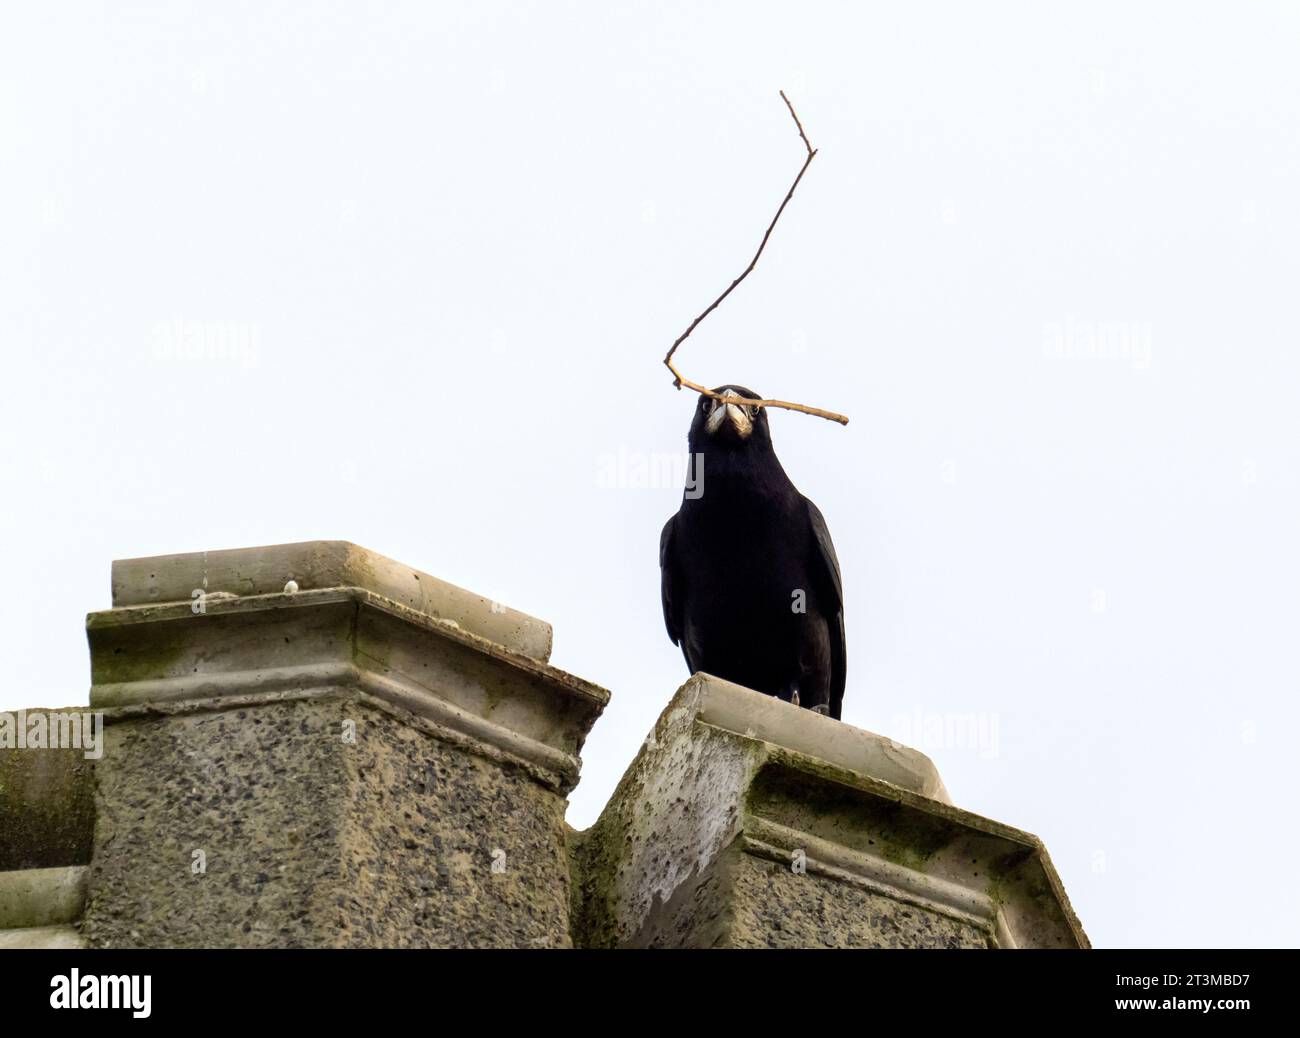 A Rook, Corvus frugilegus carrying nesting material in St Brides, Pembrokeshire, Wales, UK. Stock Photo